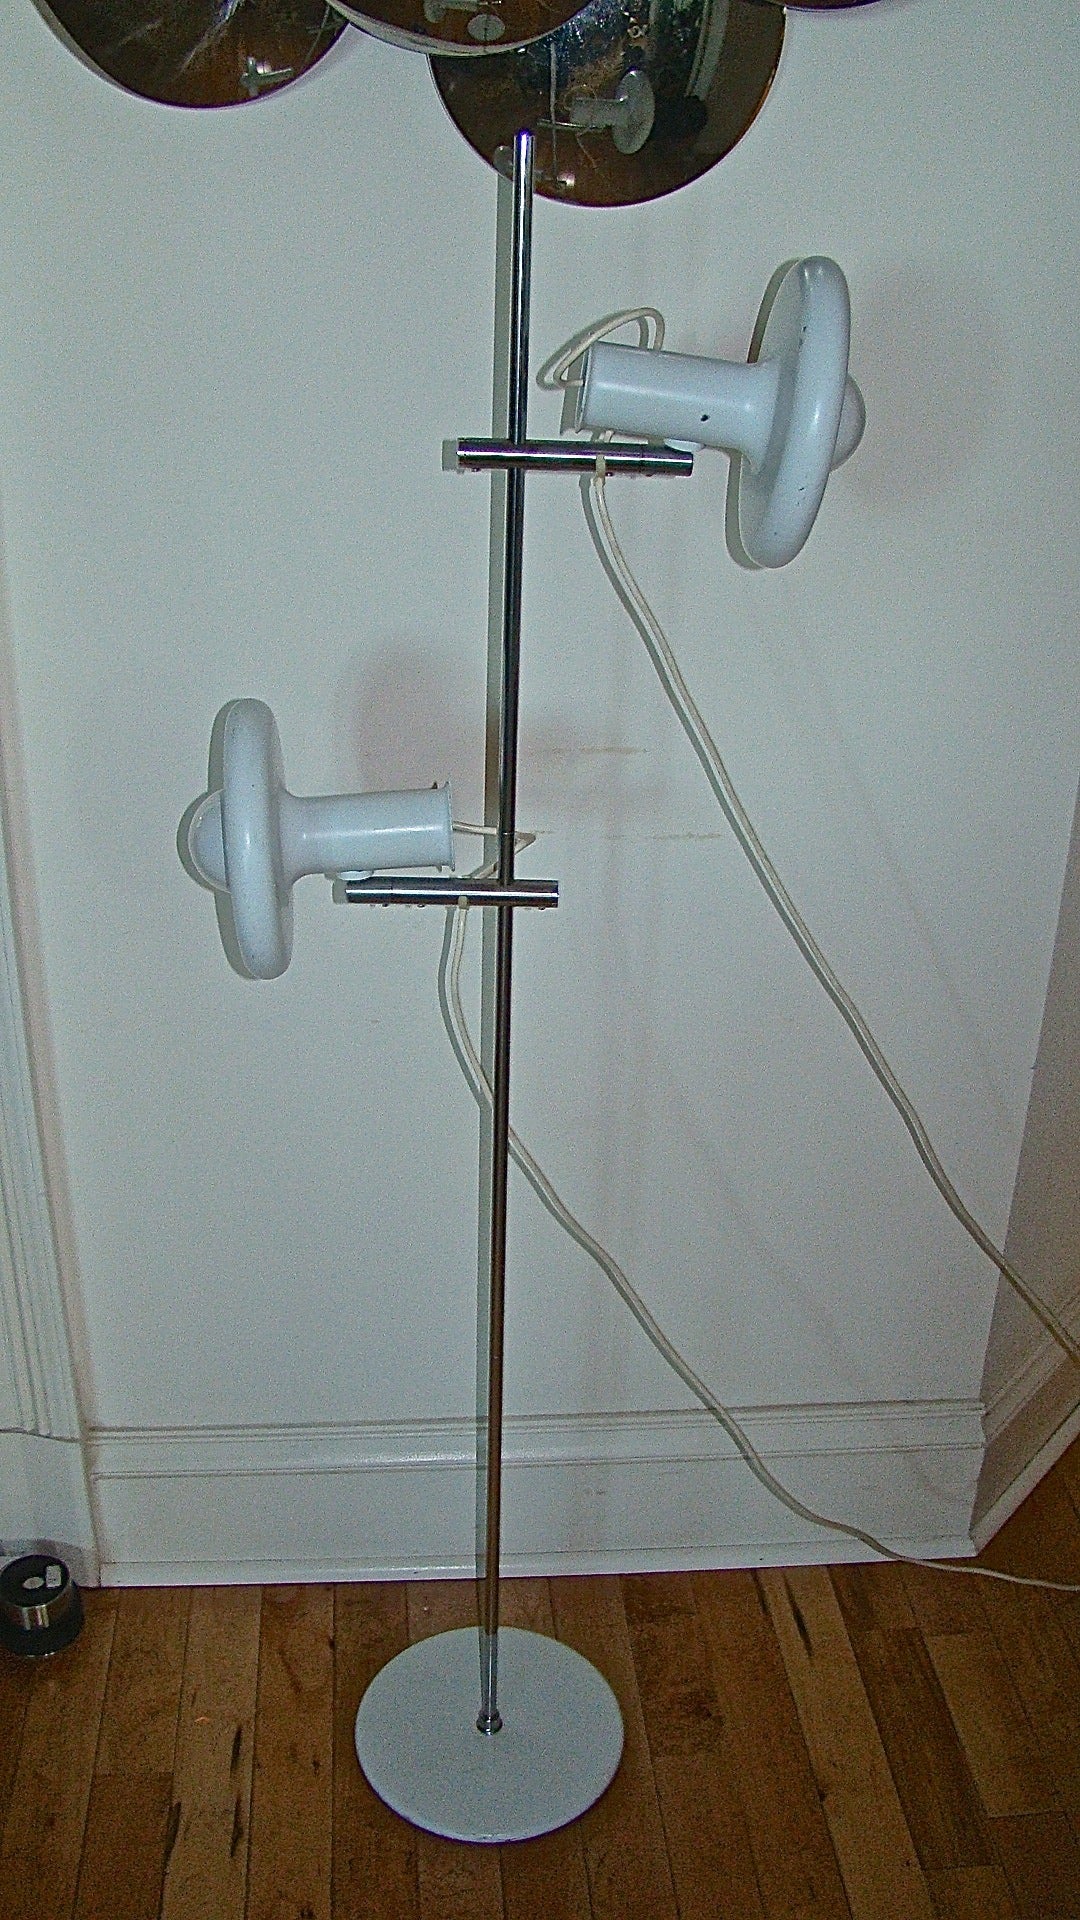 Exceptional Danish modern Mid-Century floor lamp by Fog & Morup. This unique design is comprised of two white enameled metal shades which are adjustable and pivot to position the light in many ways. Signed Fog & Morup made in Denmark.